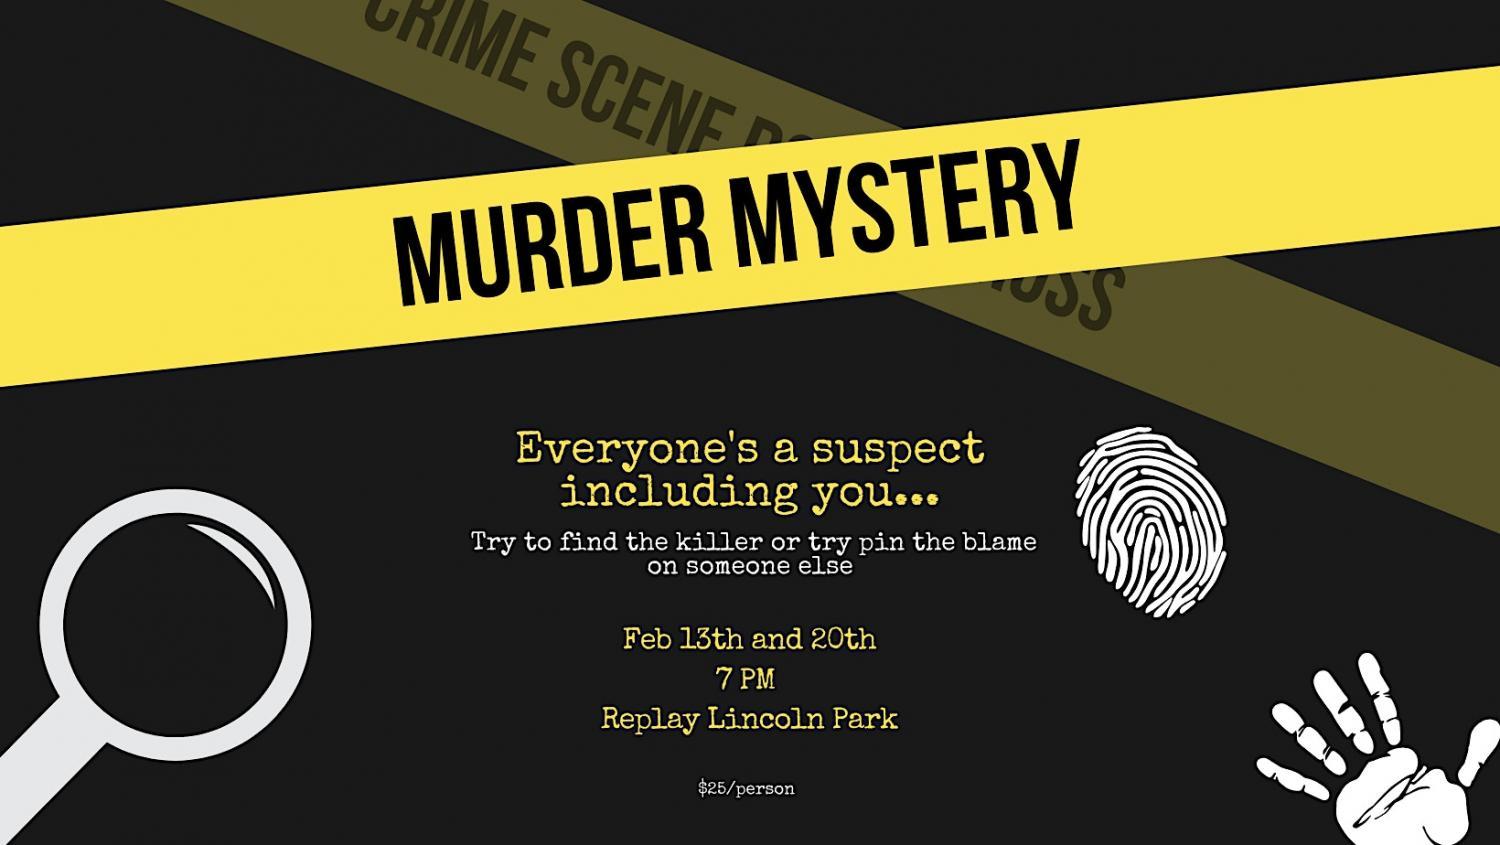 Murder Mystery at Replay Lincoln Park